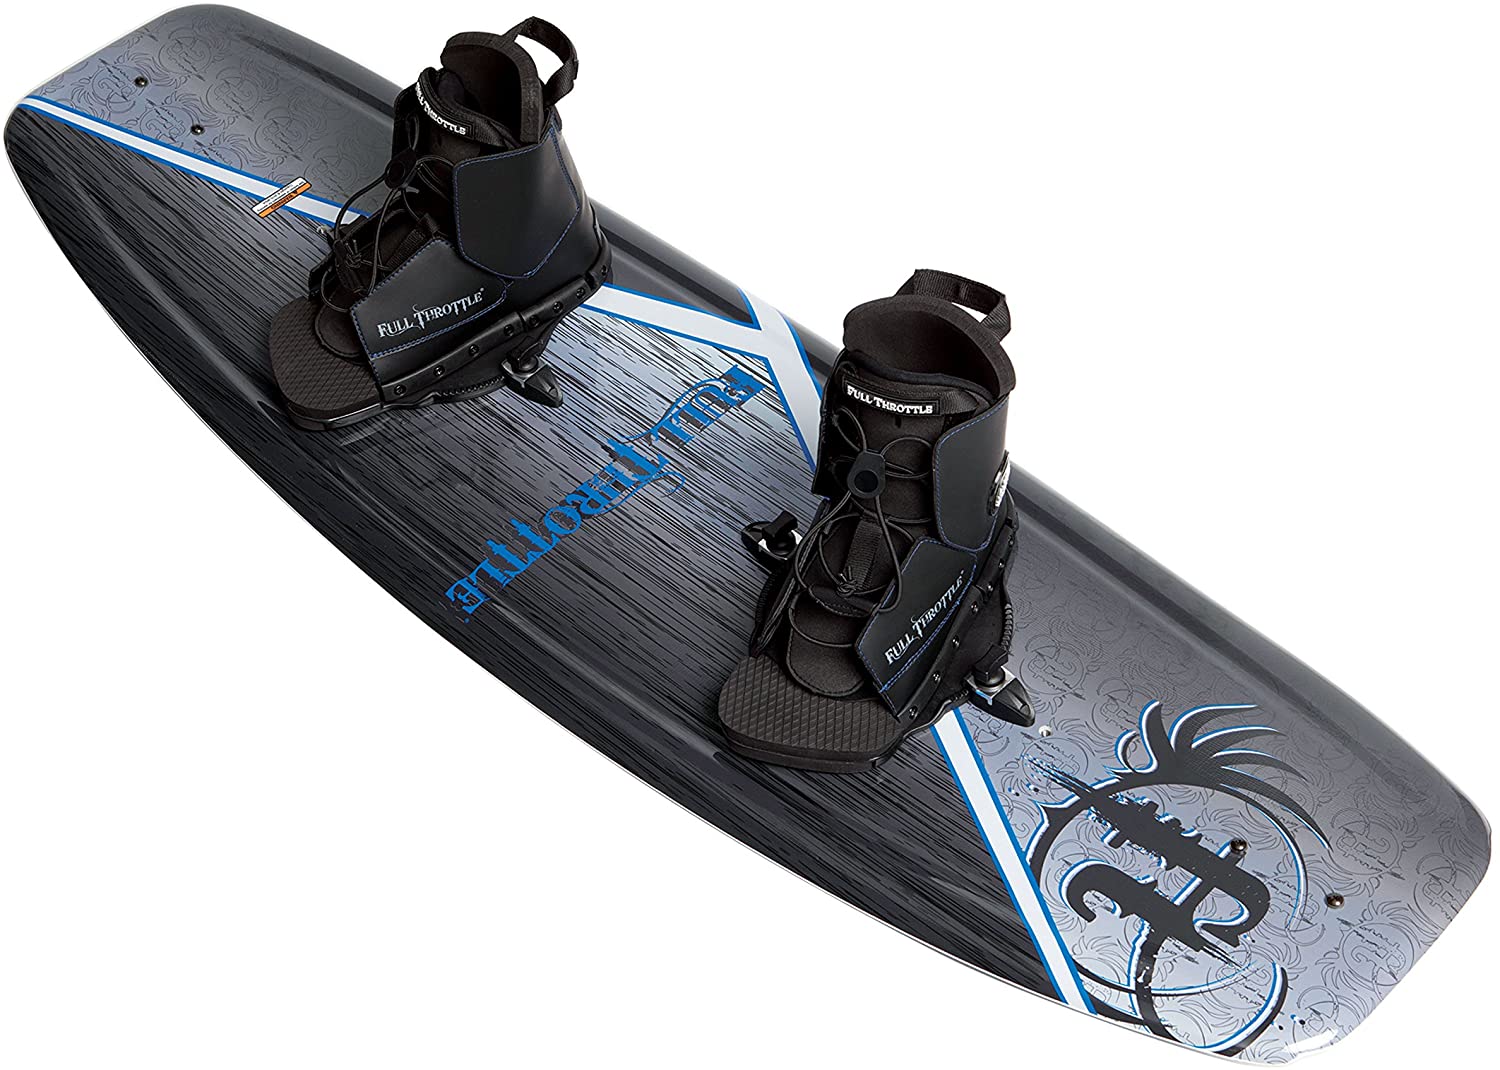 Full Throttle Absolute Outdoor Extreme Wakeboard Kit